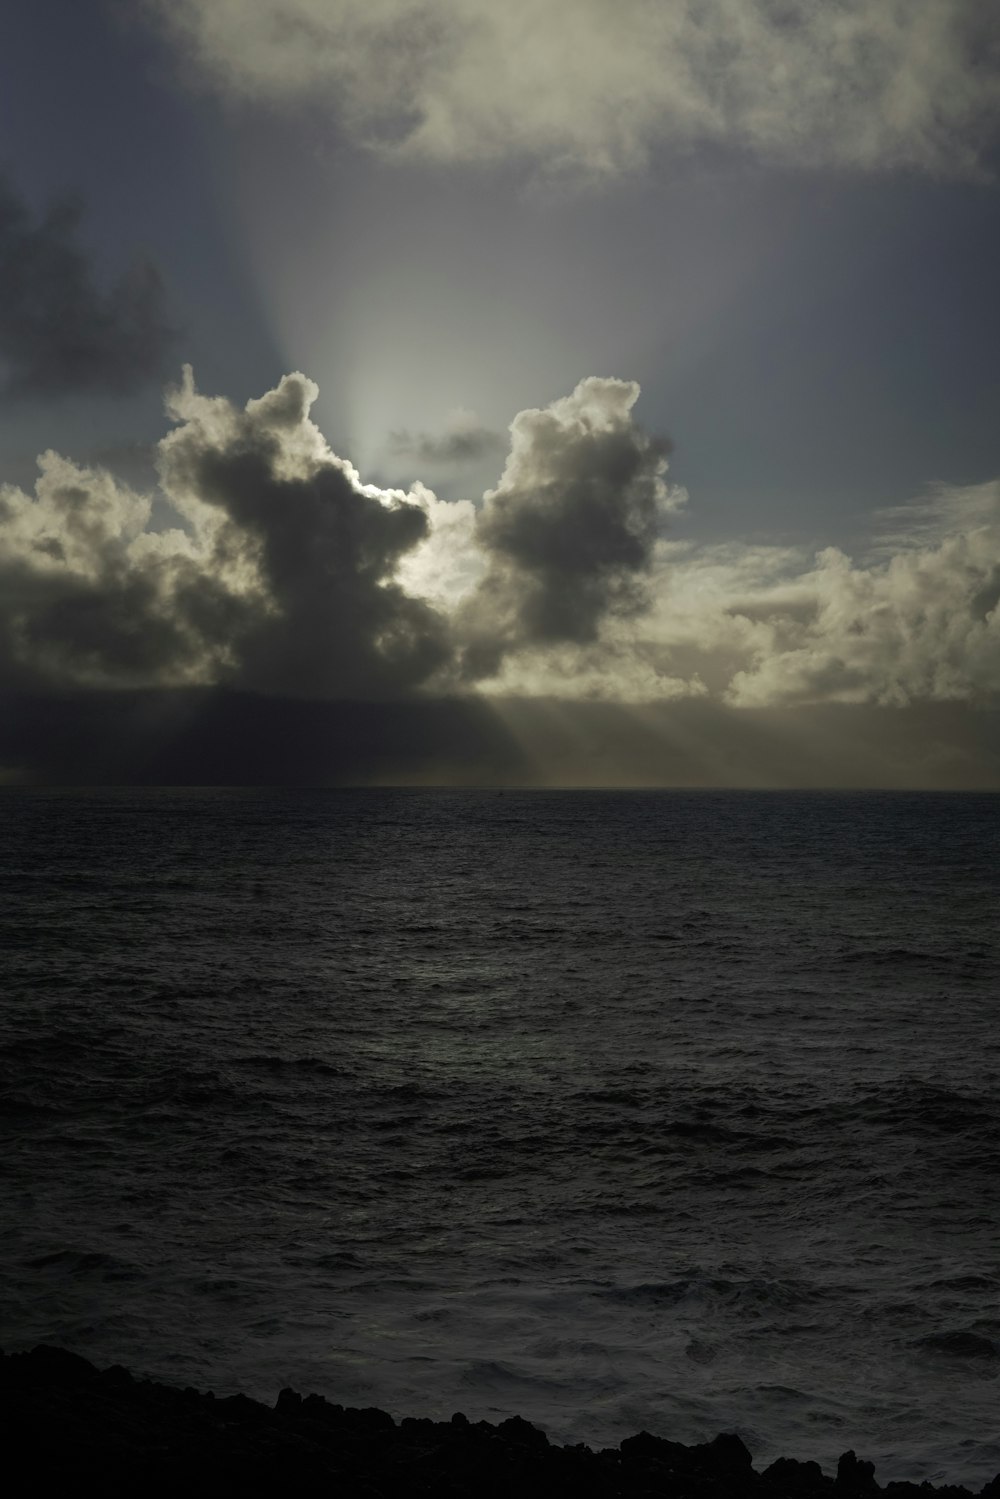 the sun shining through the clouds over the ocean